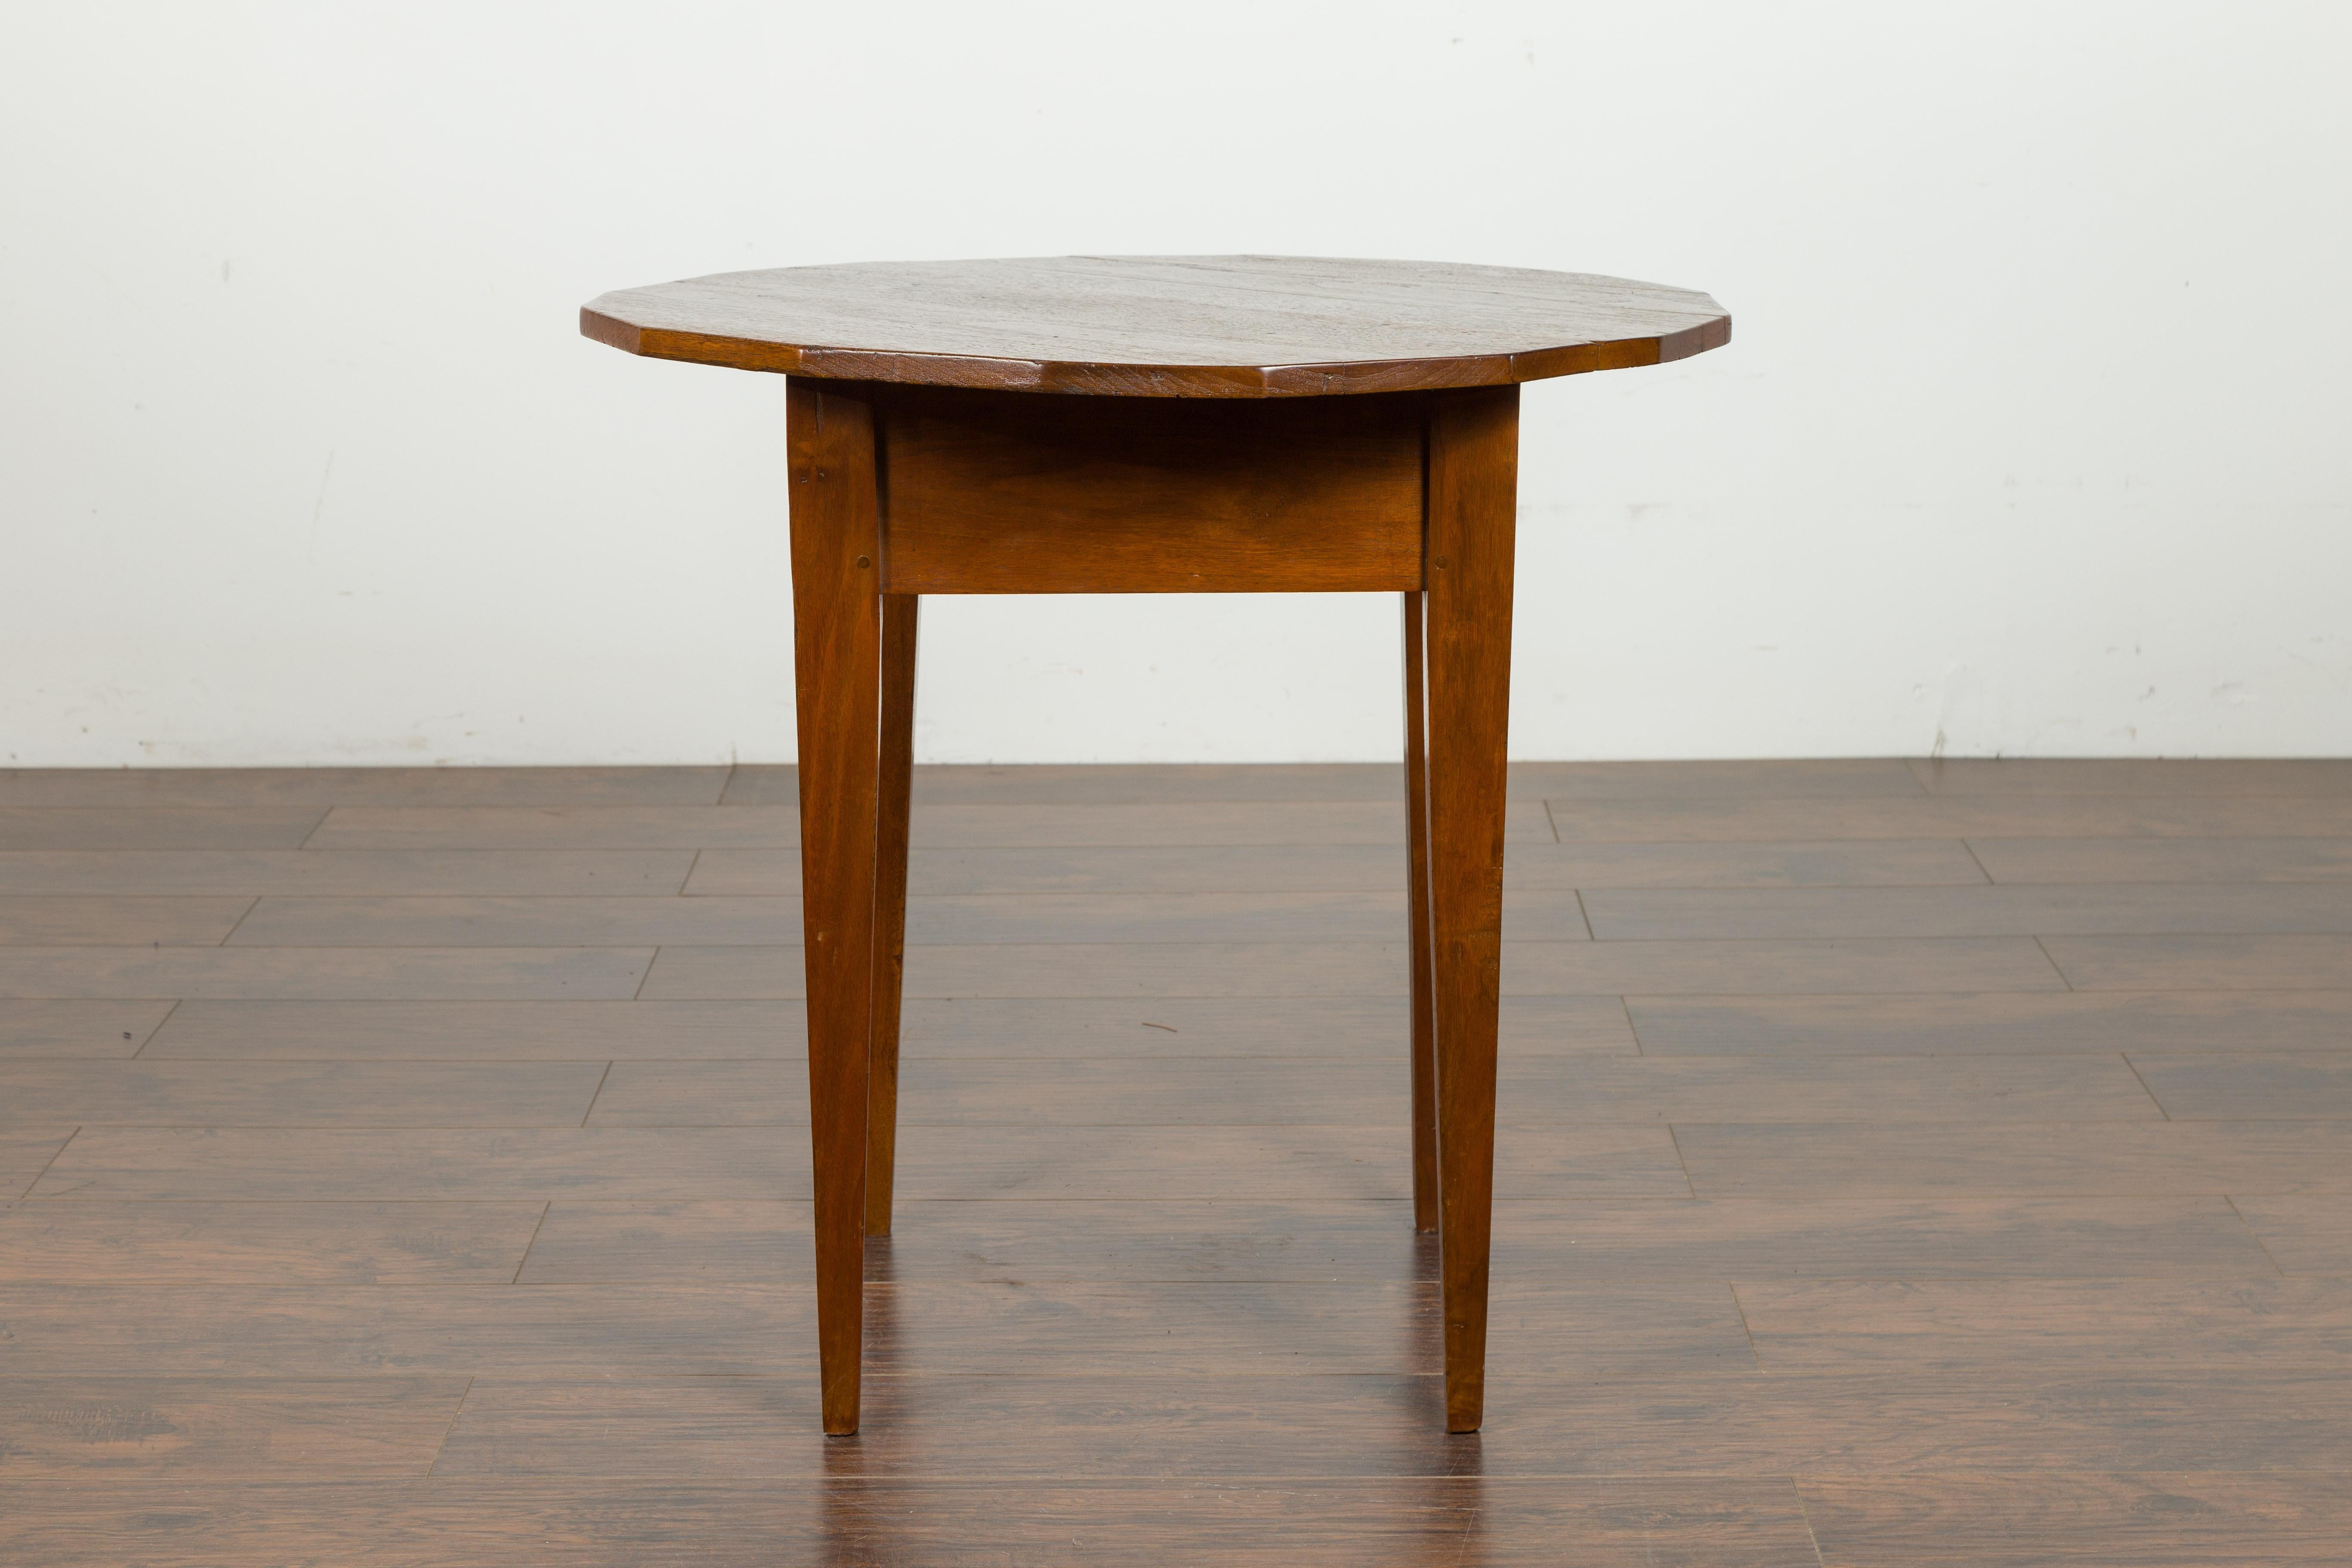 An English walnut side table from the mid-19th century, with polygonal top and tapered legs. Created in England during the third quarter of the 19th century, this side table features a polygonal top resting above a square-shaped apron. The table is